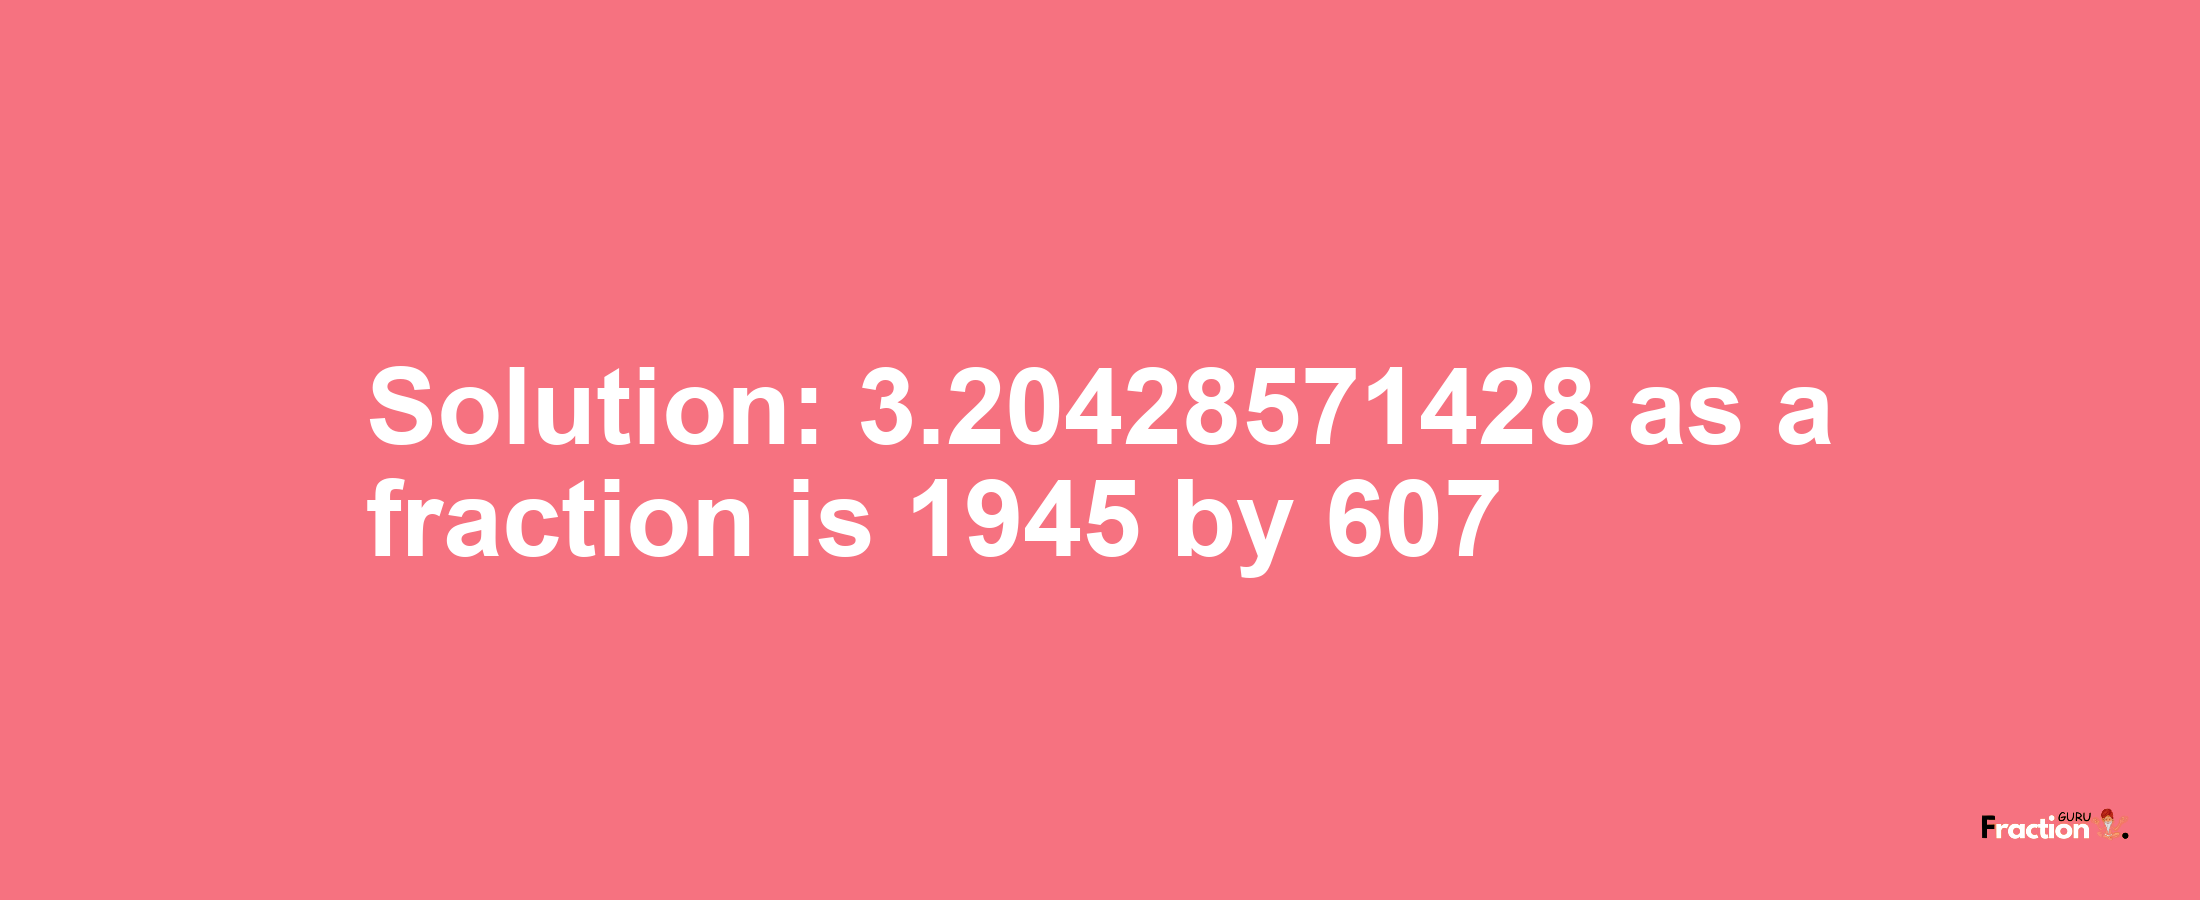 Solution:3.20428571428 as a fraction is 1945/607